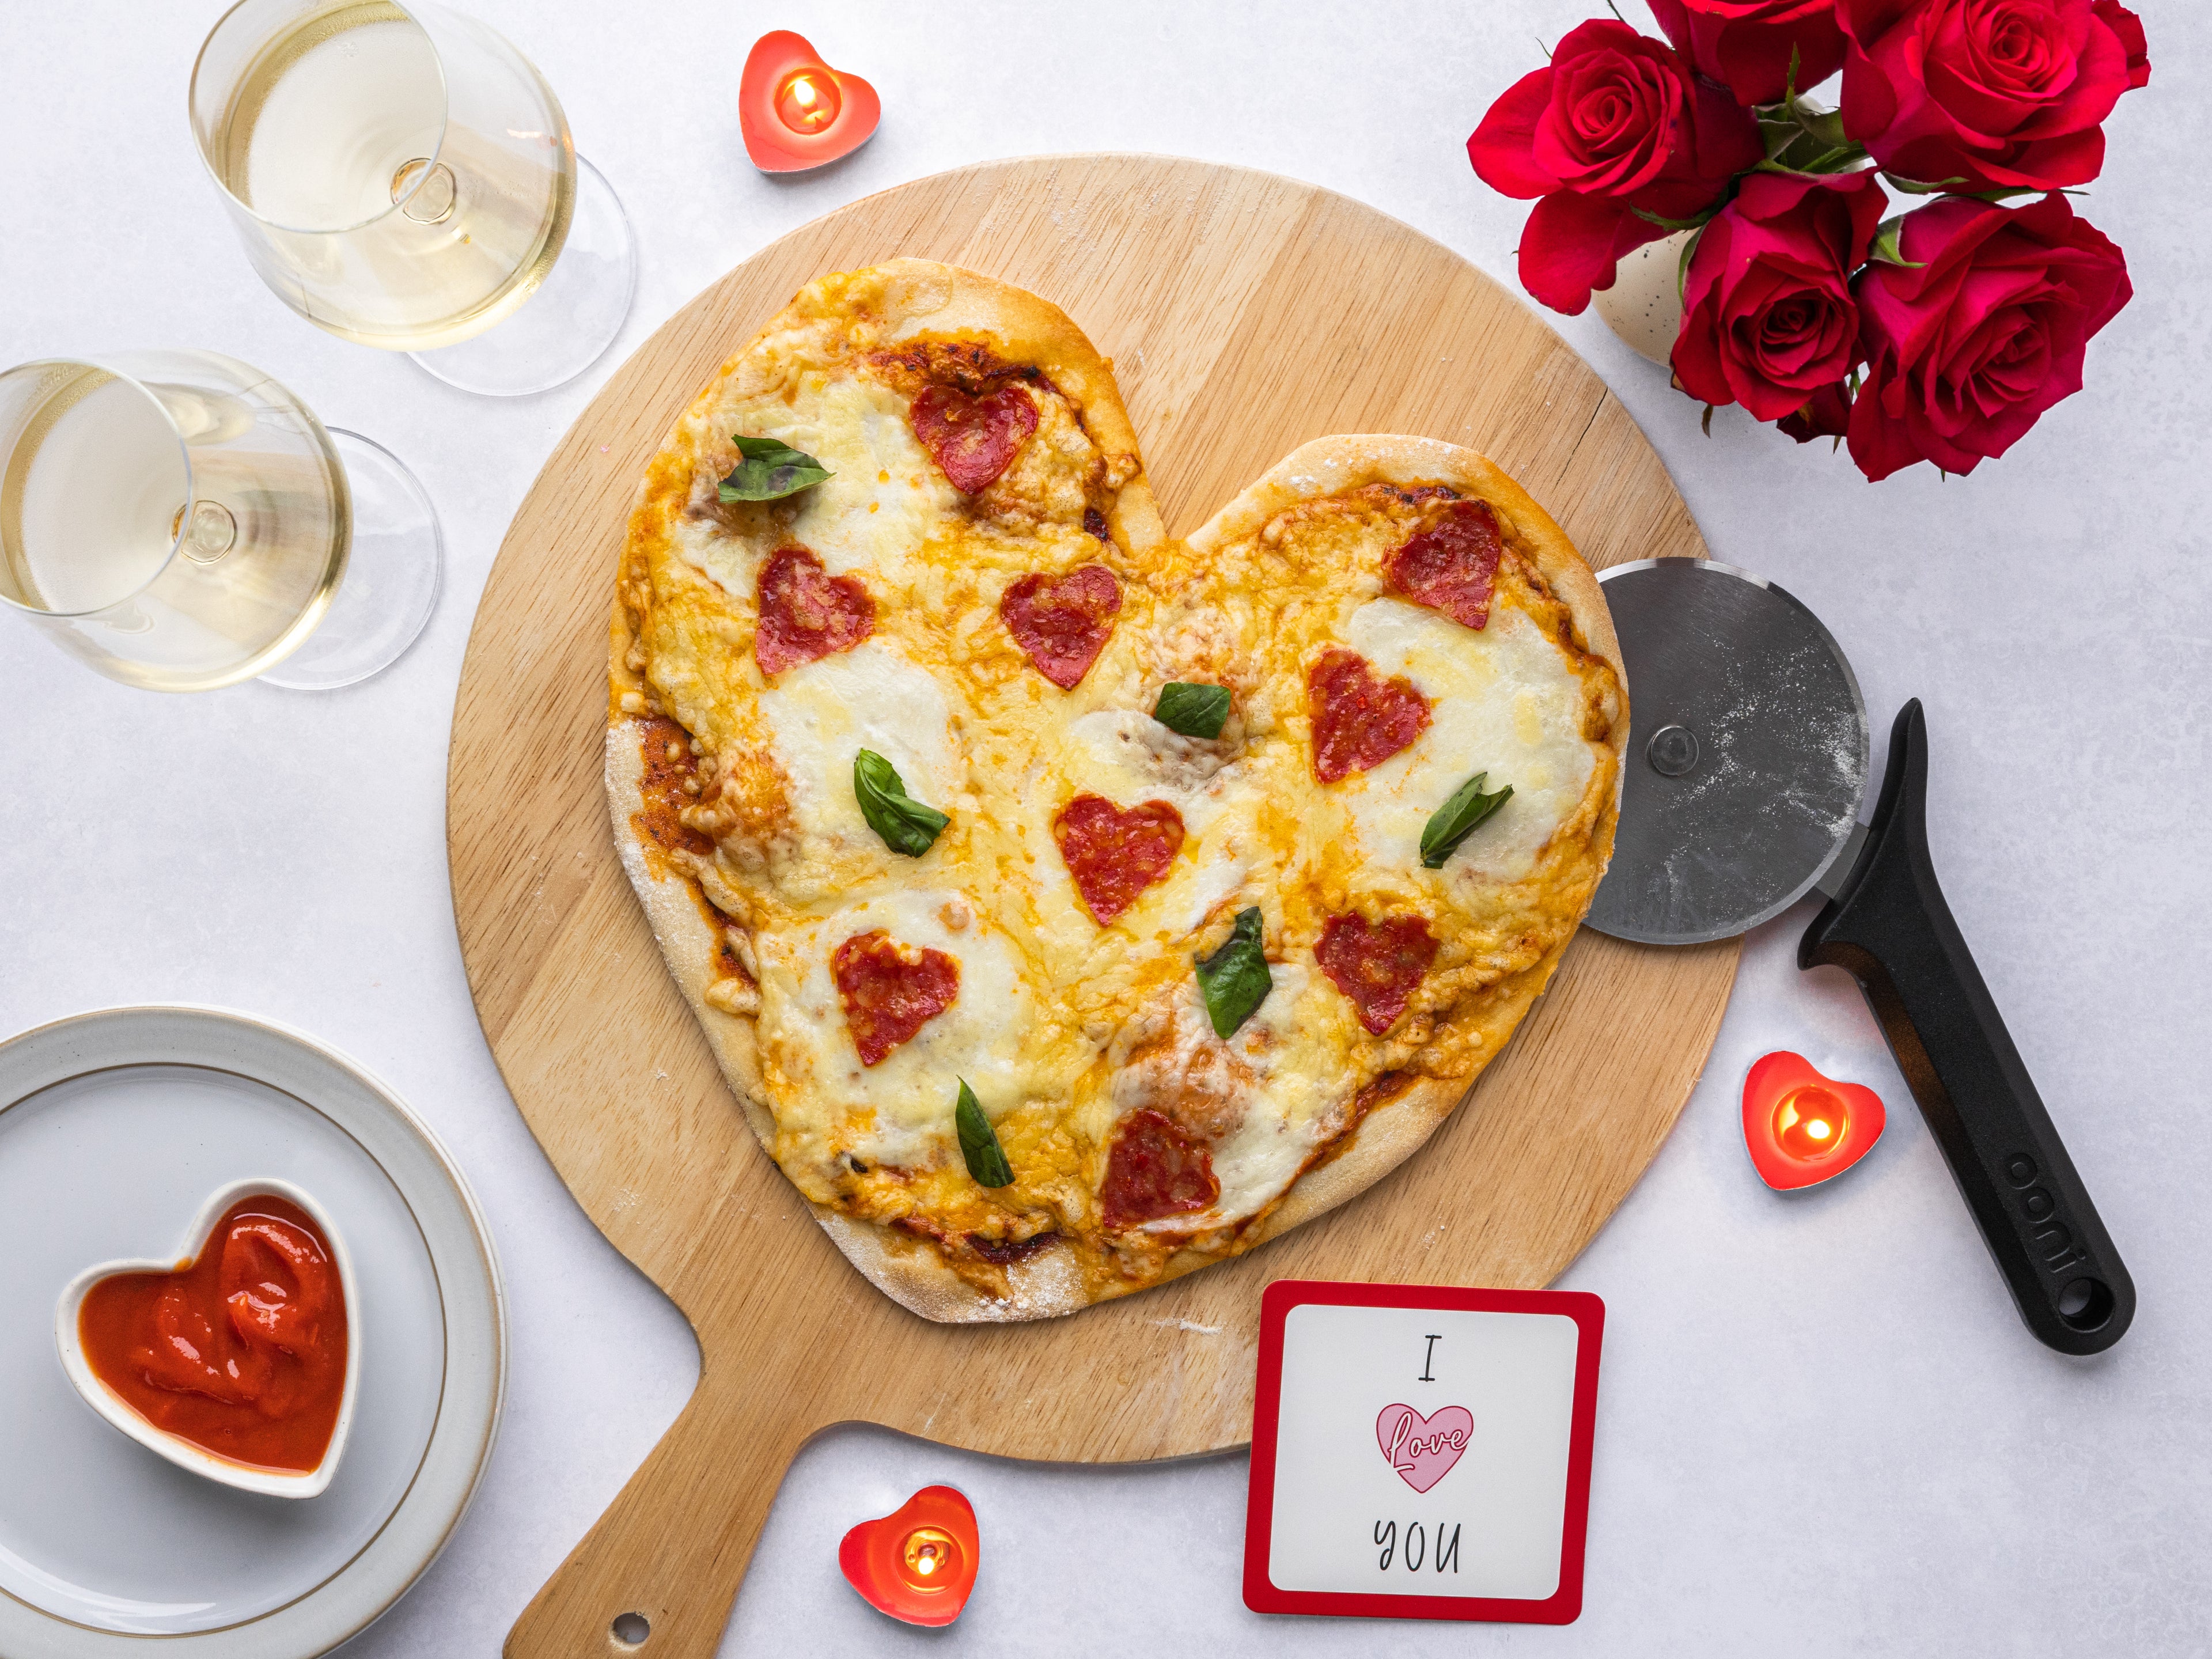 Heart shaped pizza on wooden board with glass of wine and roses